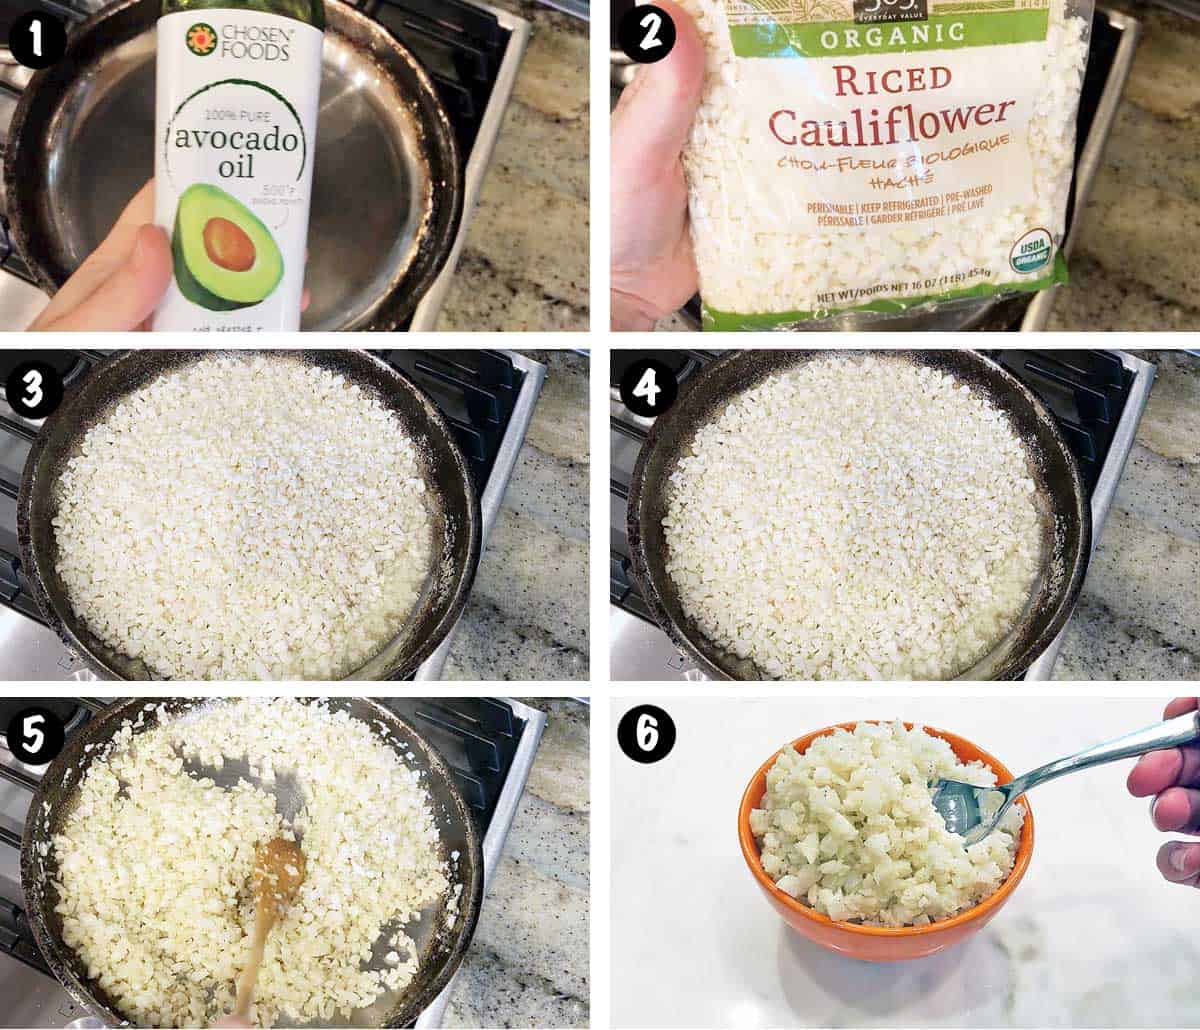 A photo collage showing the steps for making riced cauliflower. 